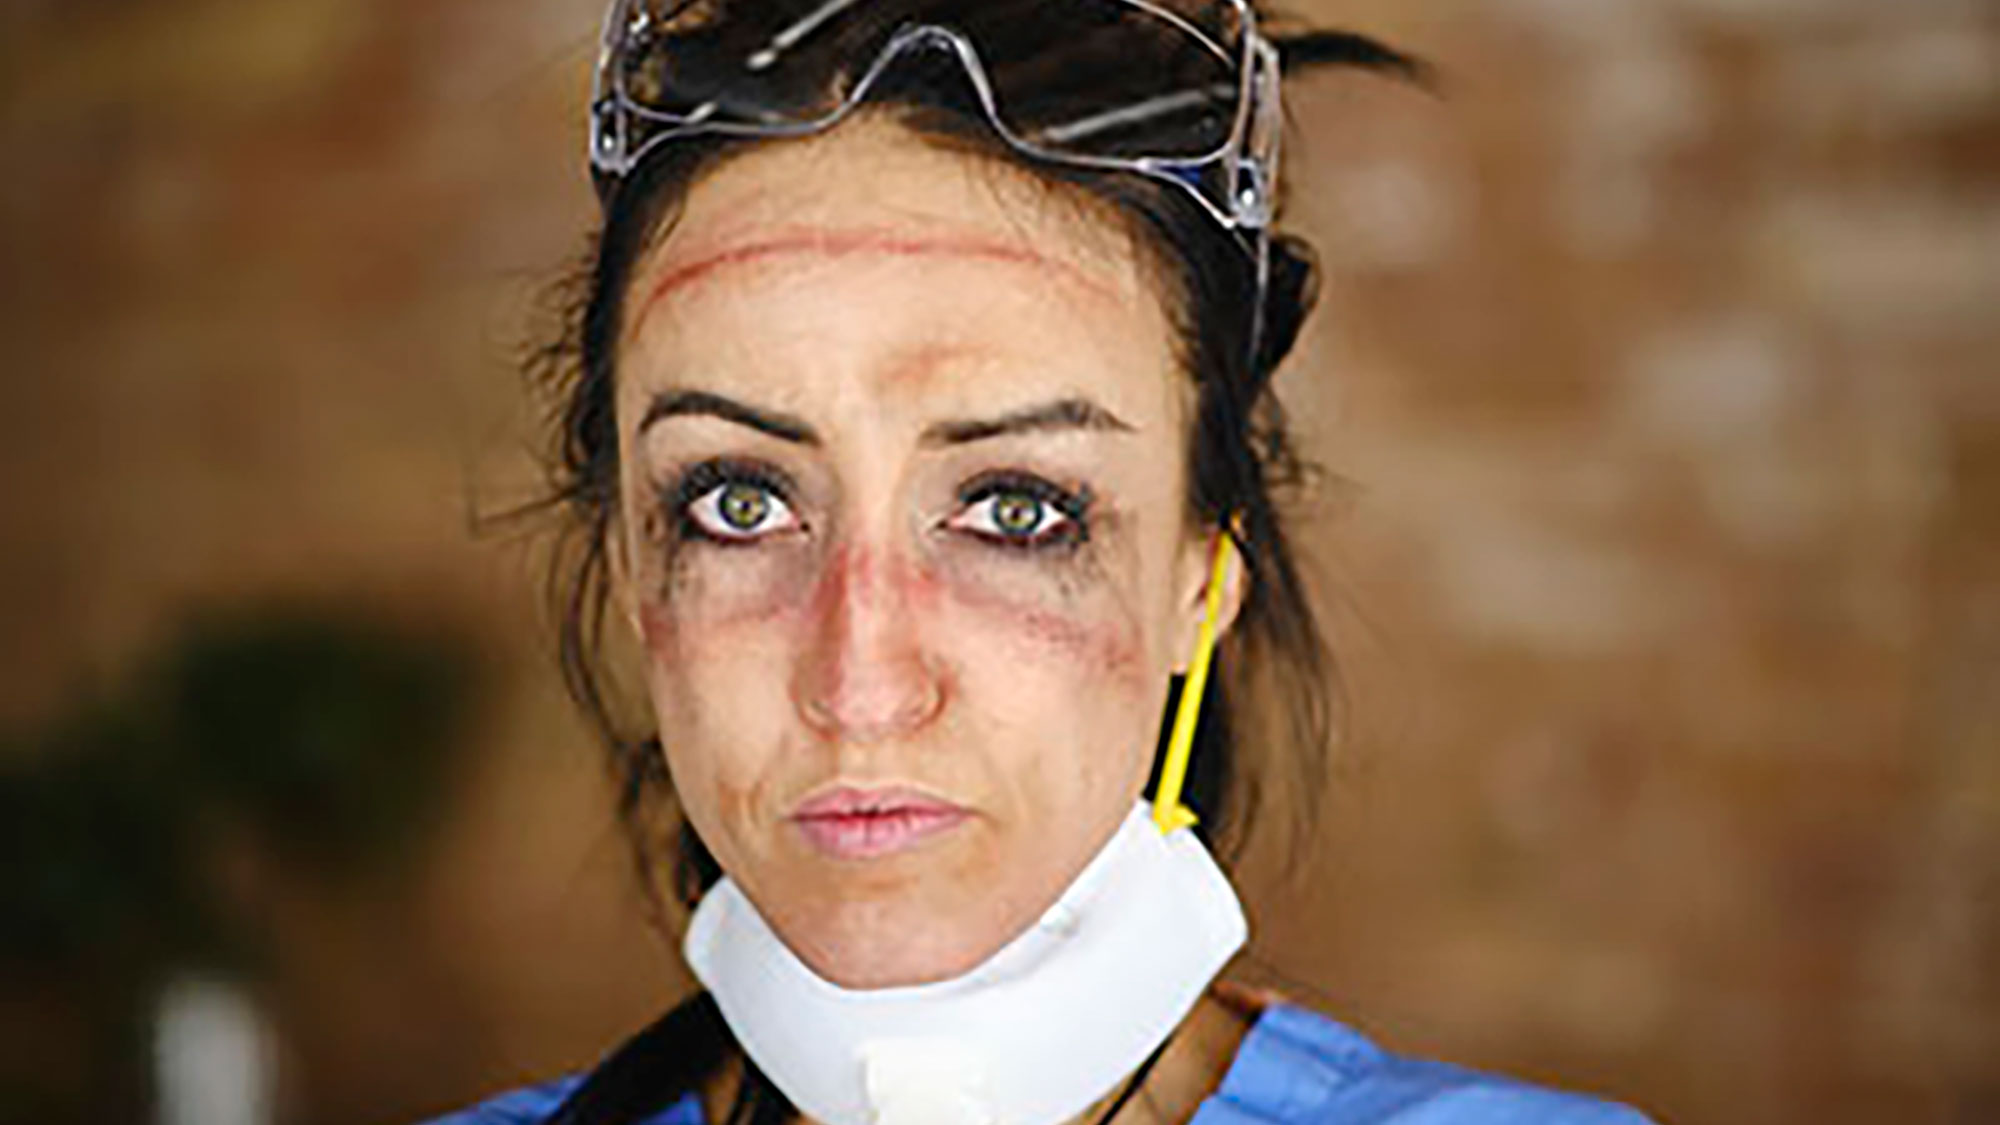 A woman nurse has bruising and discoloration on her face from wearing goggles and masks for long amounts of time.